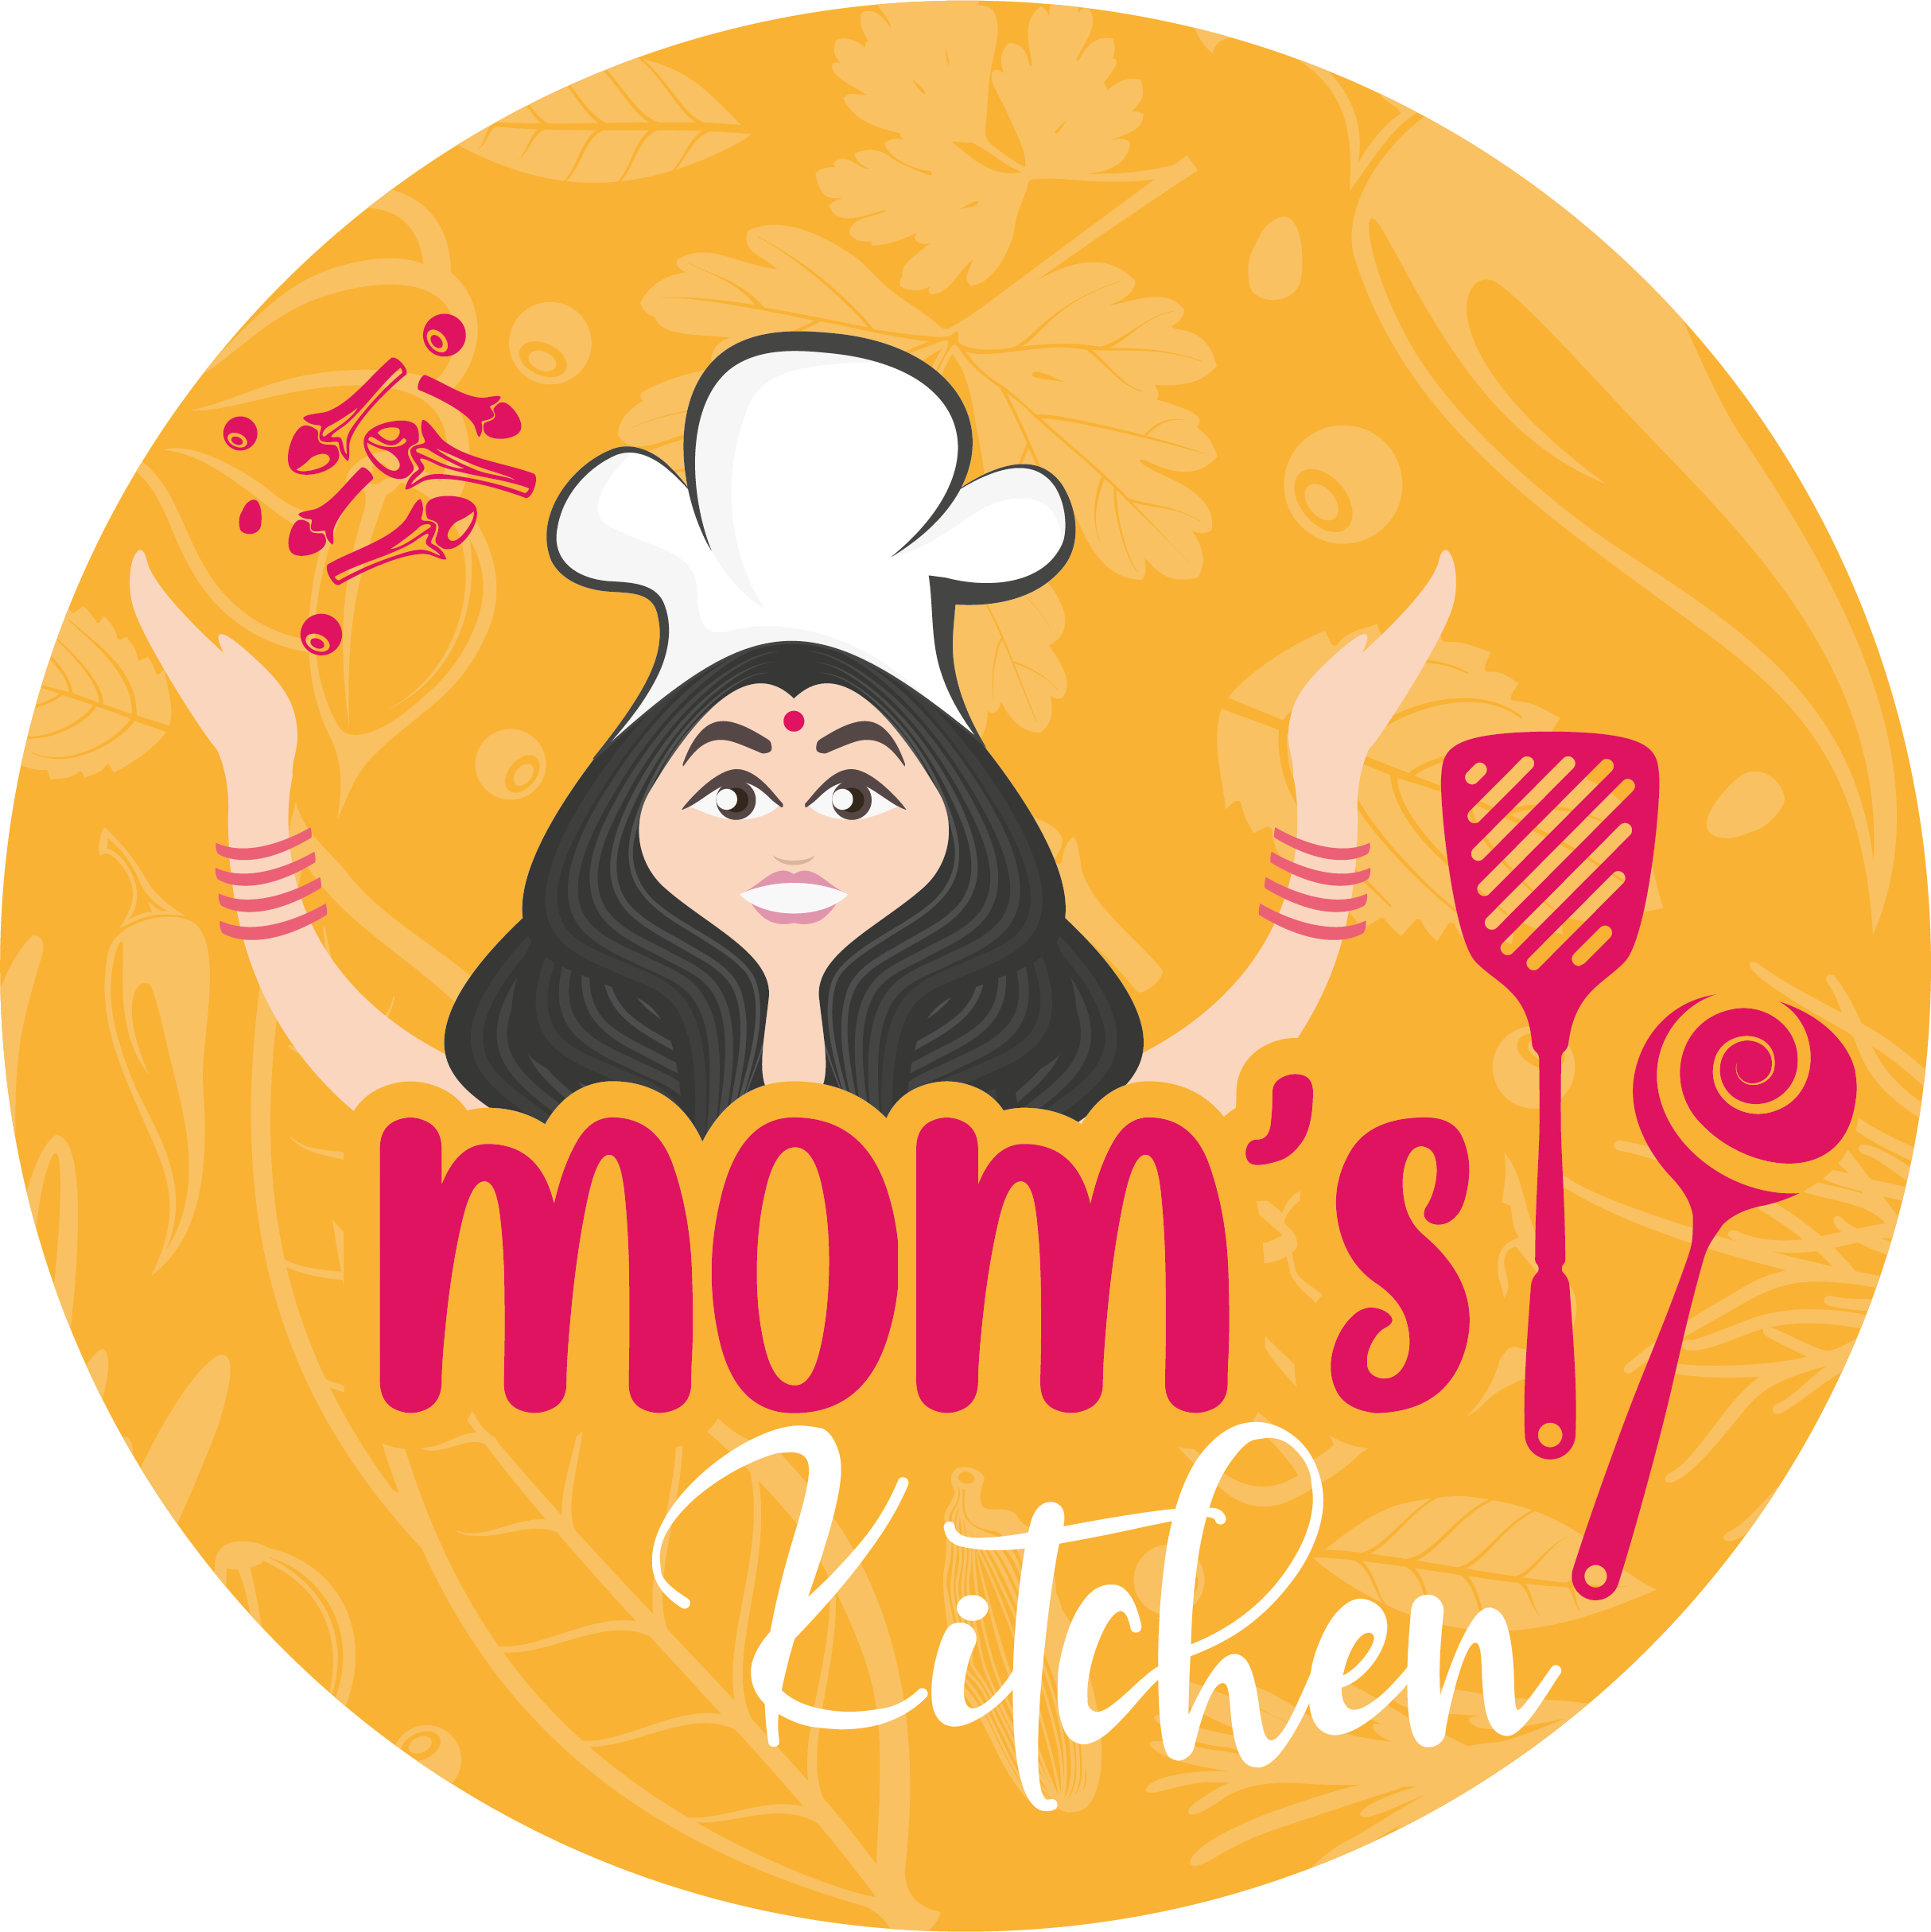 Mum's Kitchen Stock Vector Illustration and Royalty Free Mum's Kitchen  Clipart